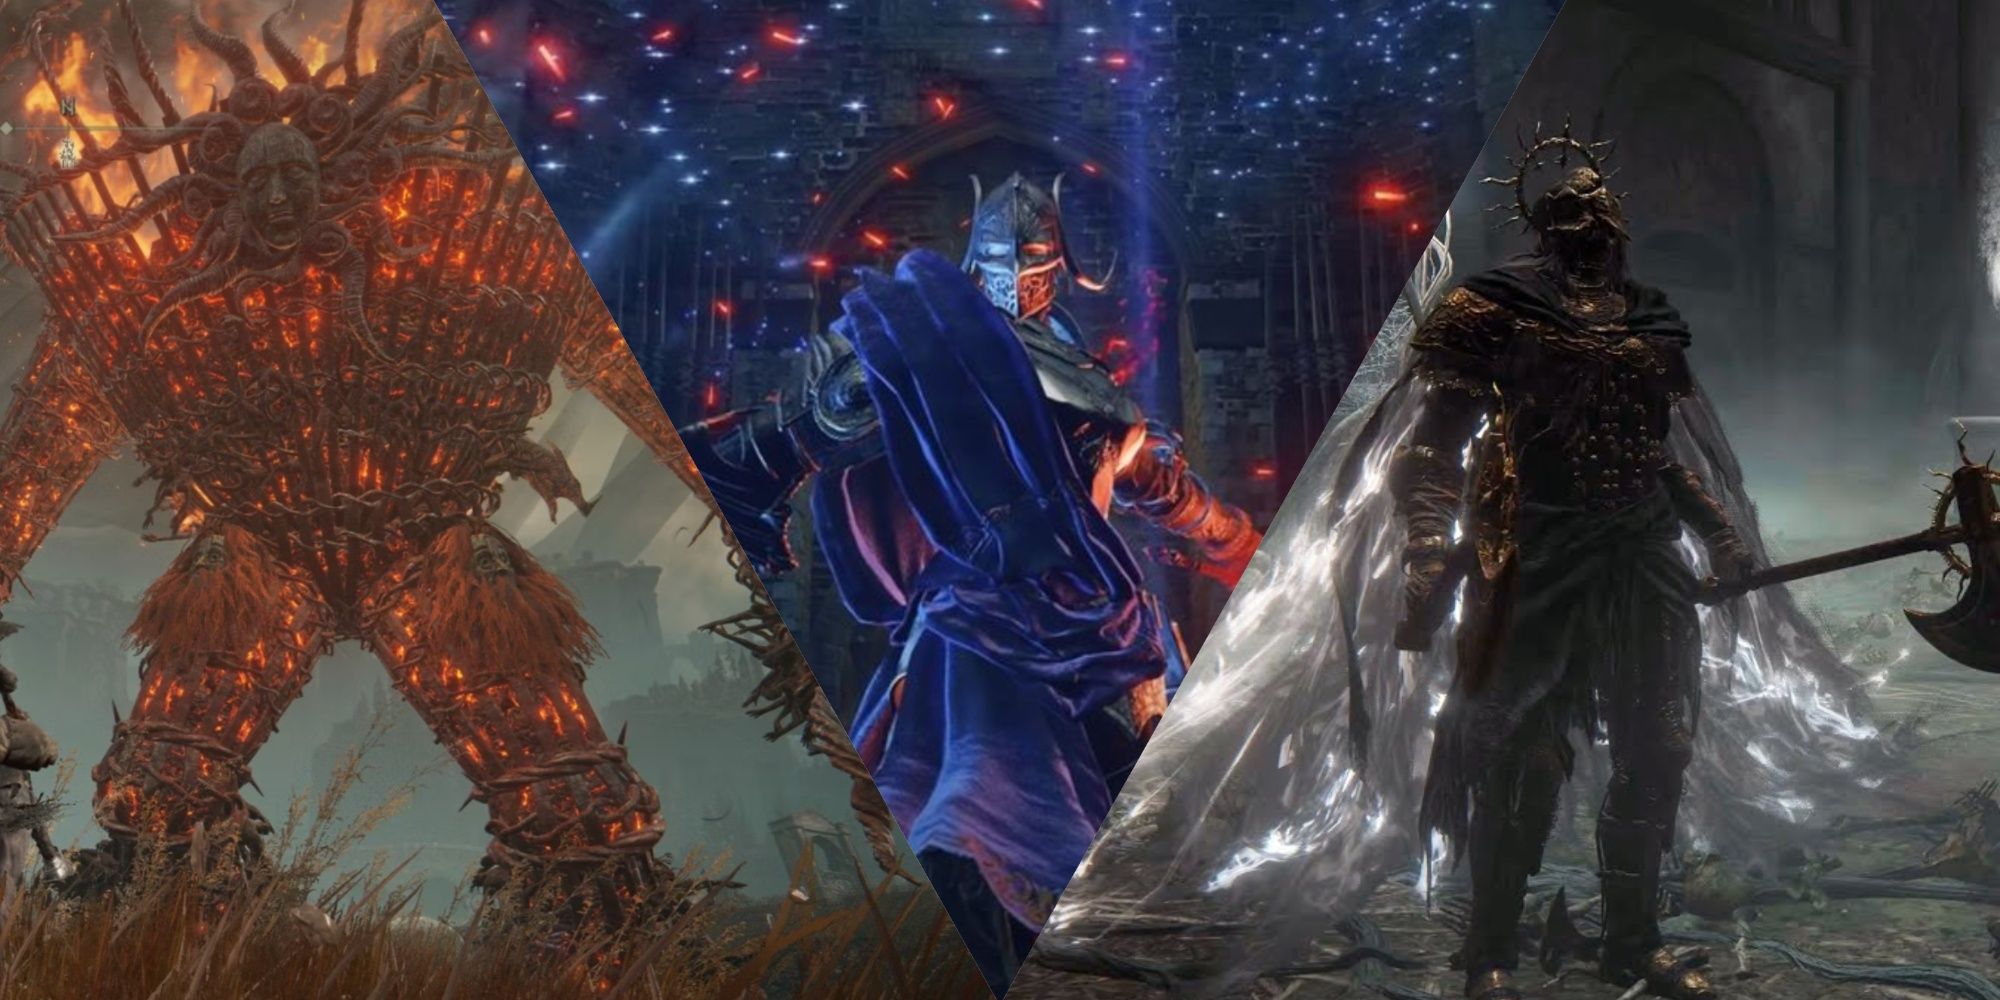 Elden Ring collage of a Furnace Golem, Rellana, and a Death Knight